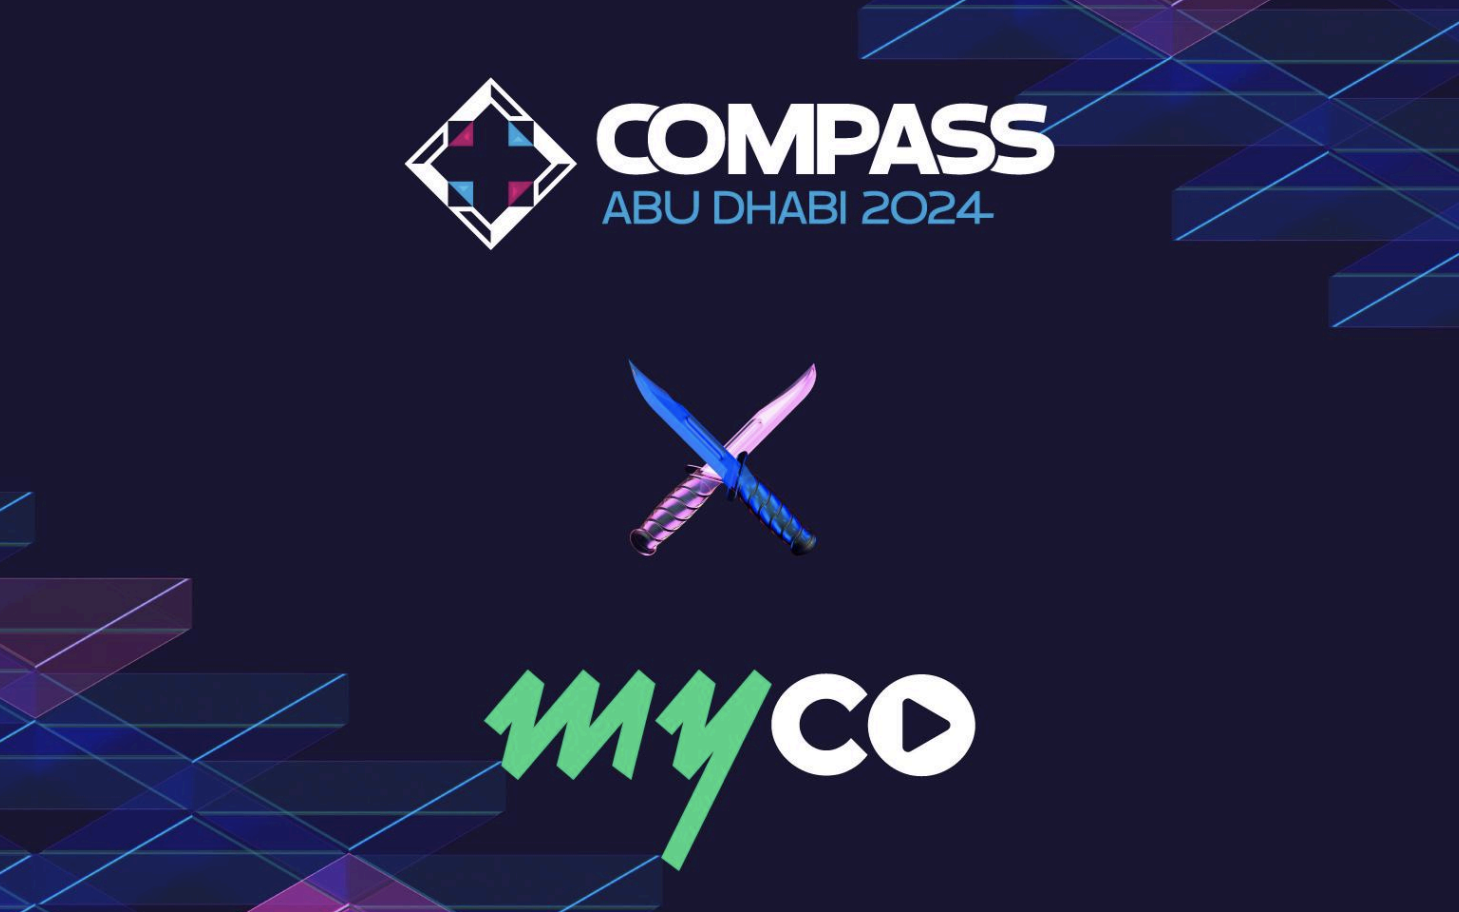 YaLLa Esports partners with Myco for Compass Counter-Strike 2 event